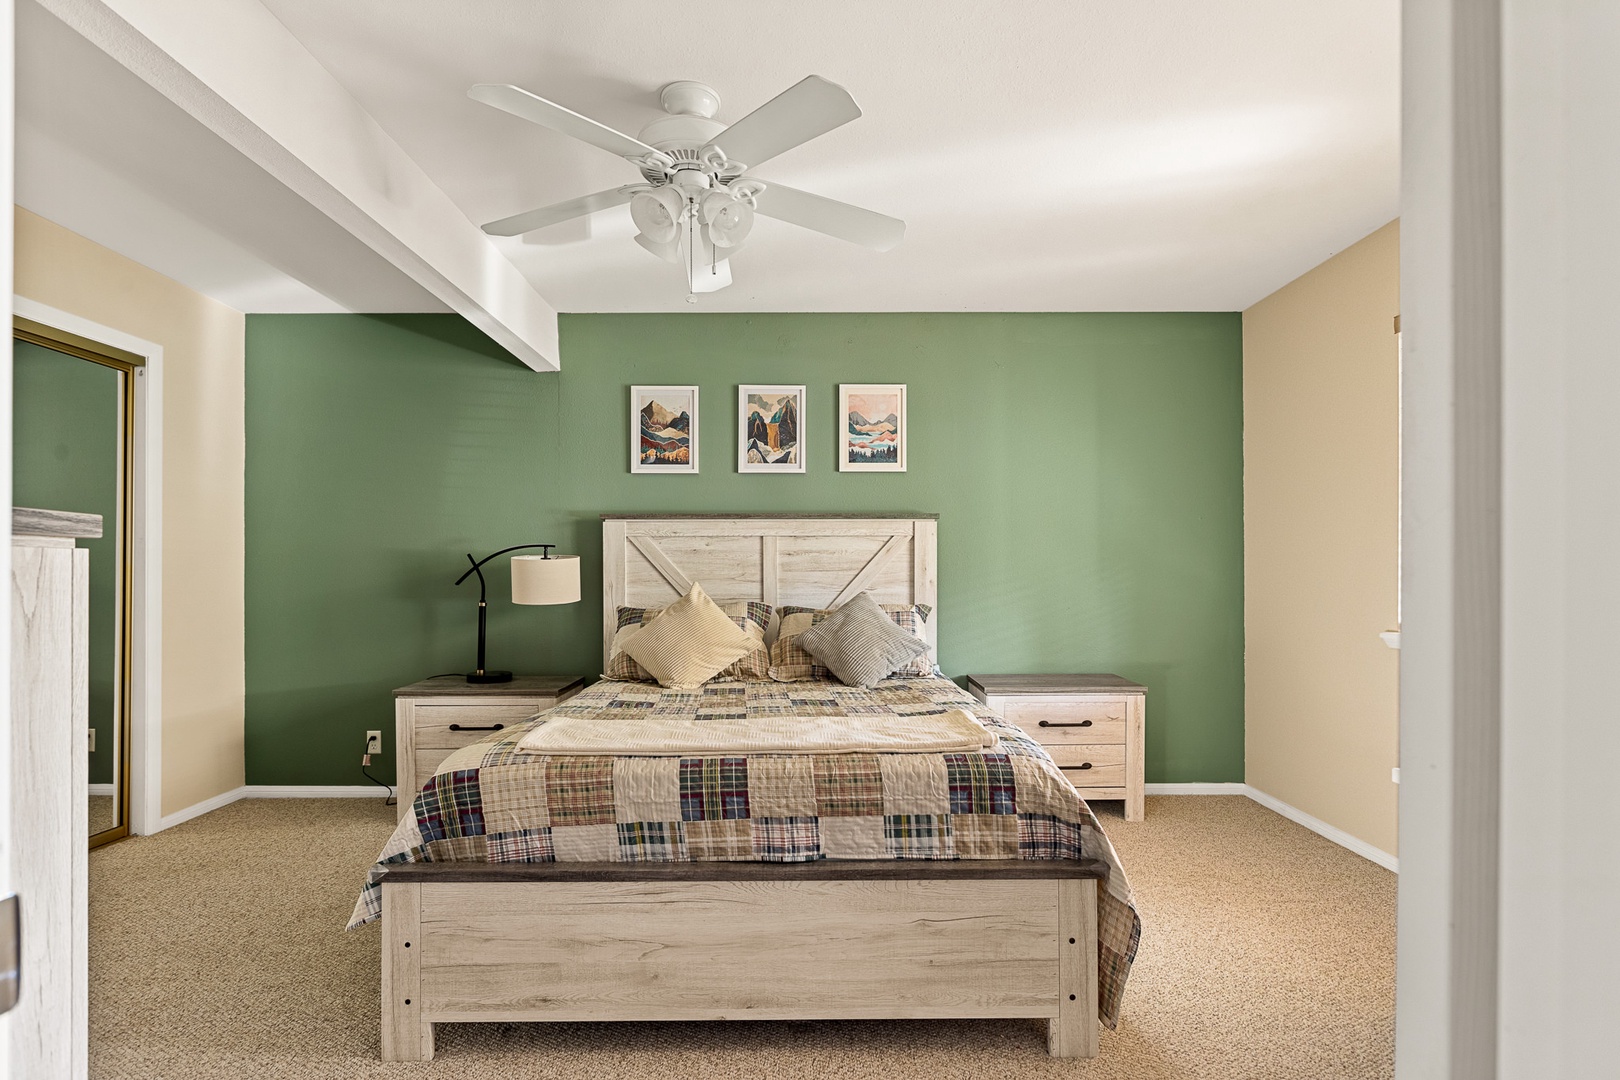 The first of two bedroom offers a queen bed, ceiling fan, & plenty of space